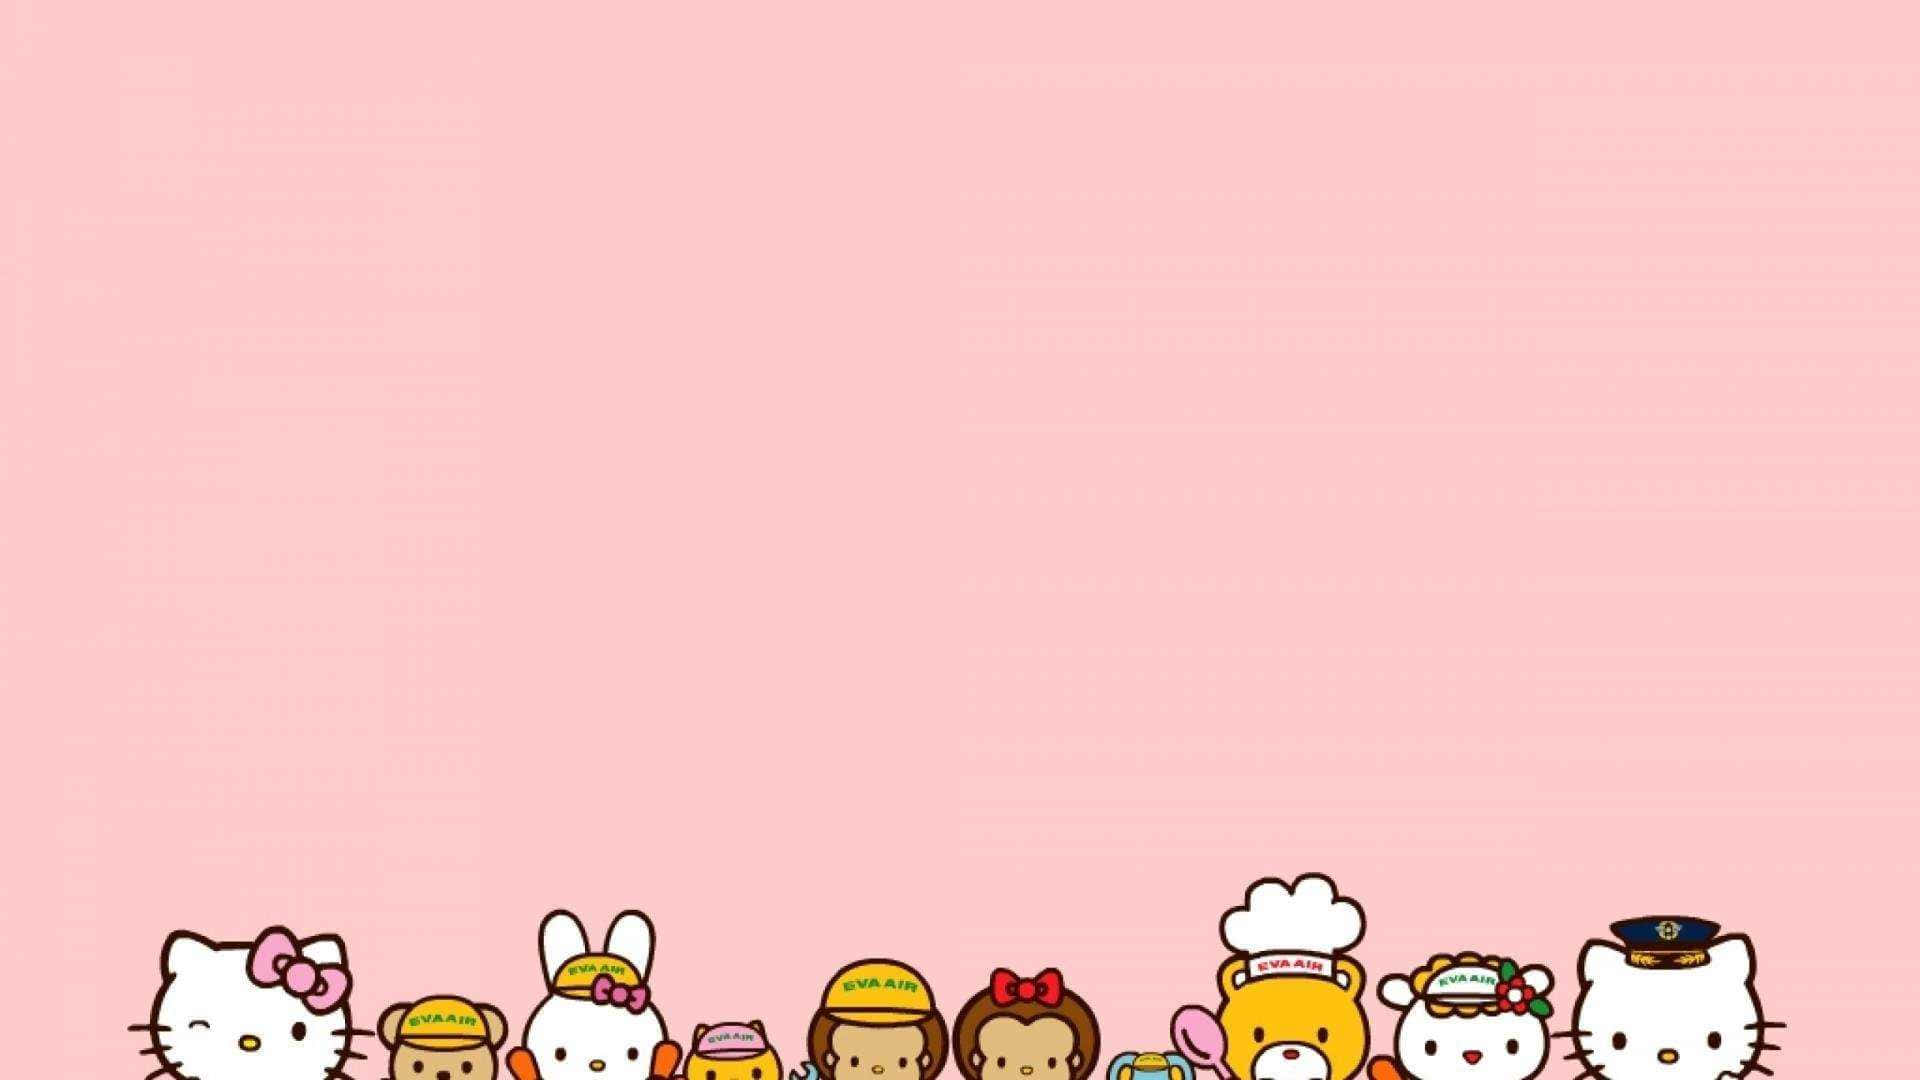 Get your hands on the cutest little laptop: the Hello Kitty PC Wallpaper